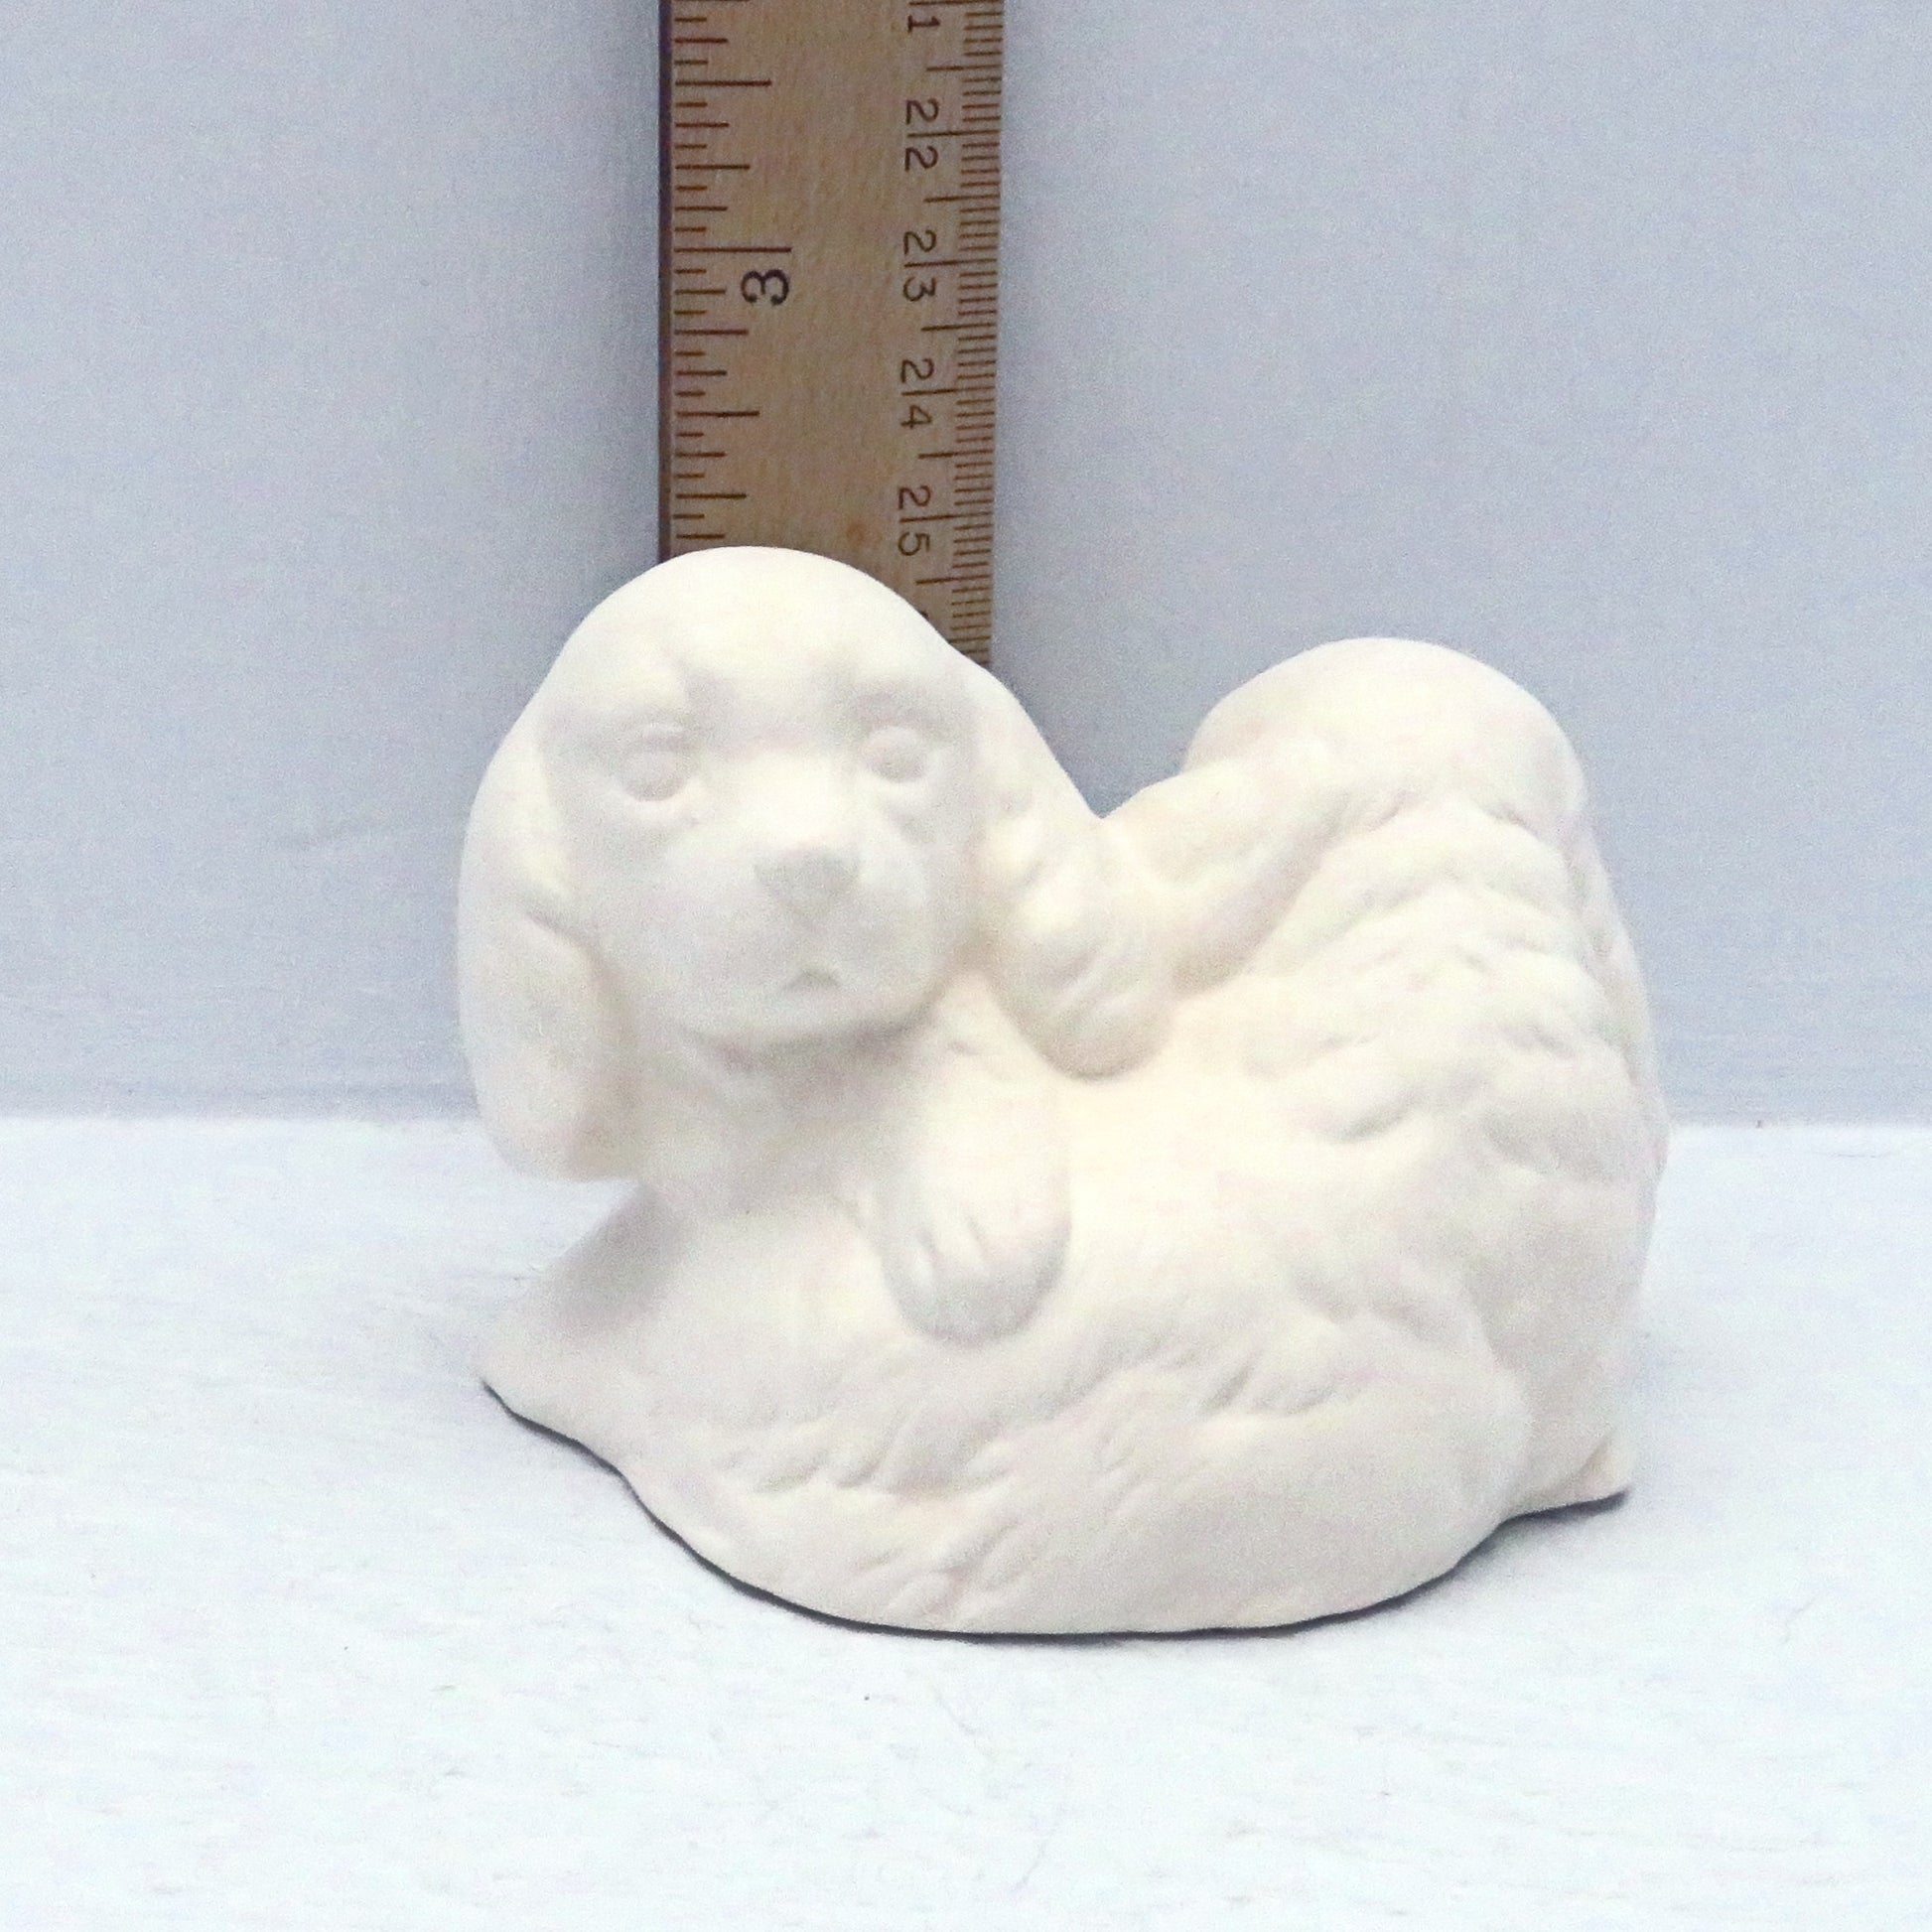 handmade ready to paint ceramic puppies statue near a ruler showing them to be approximately 2 1/4 inches tall against a pale blue background